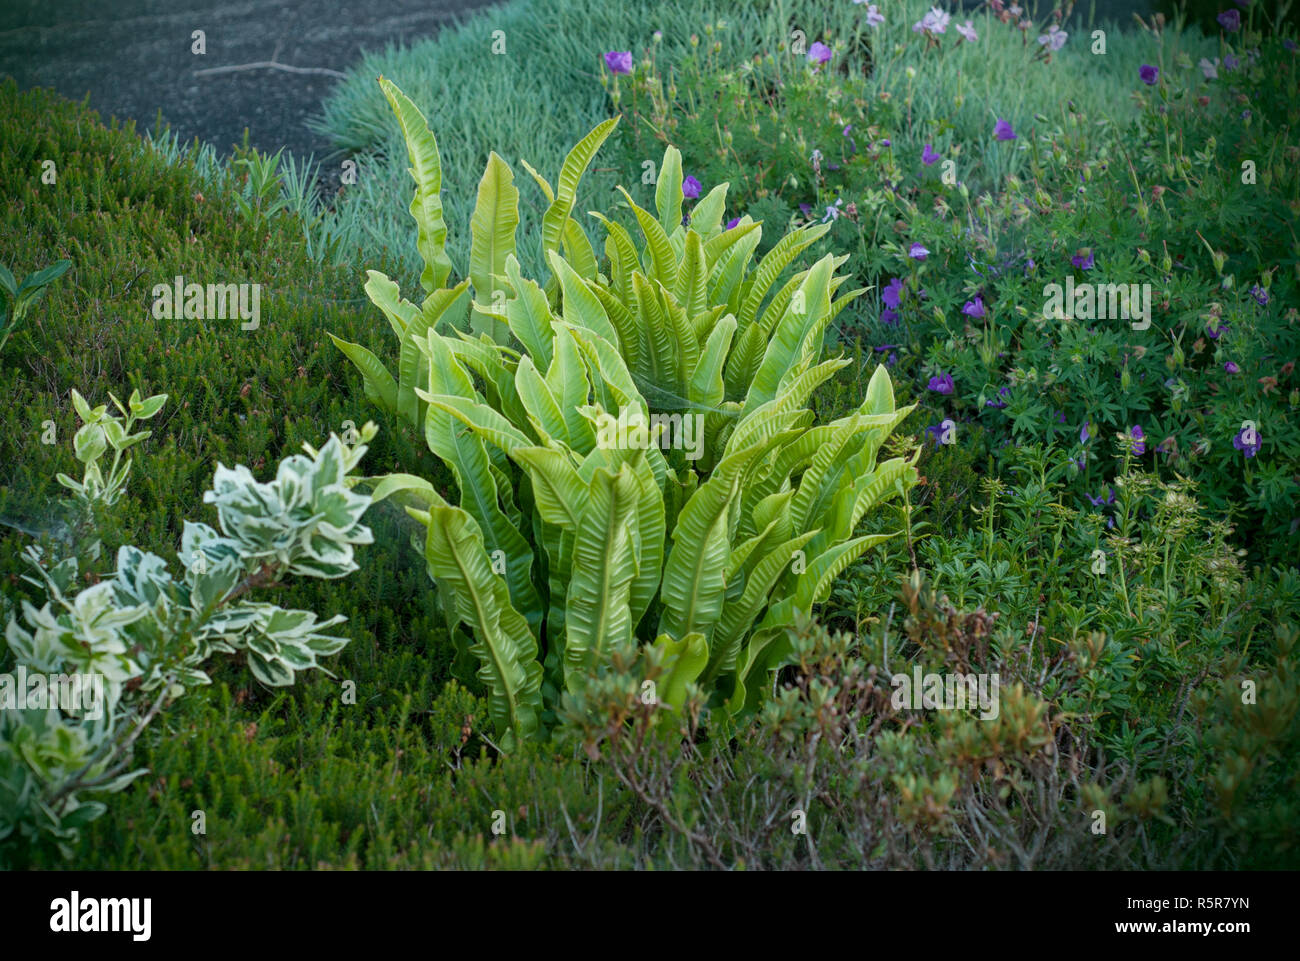 Landscape design from different plant and flower in the city. A beutiful combinatio of Hart's-tongue fern (Asplenium scolopendrium) and Parennials shr Stock Photo